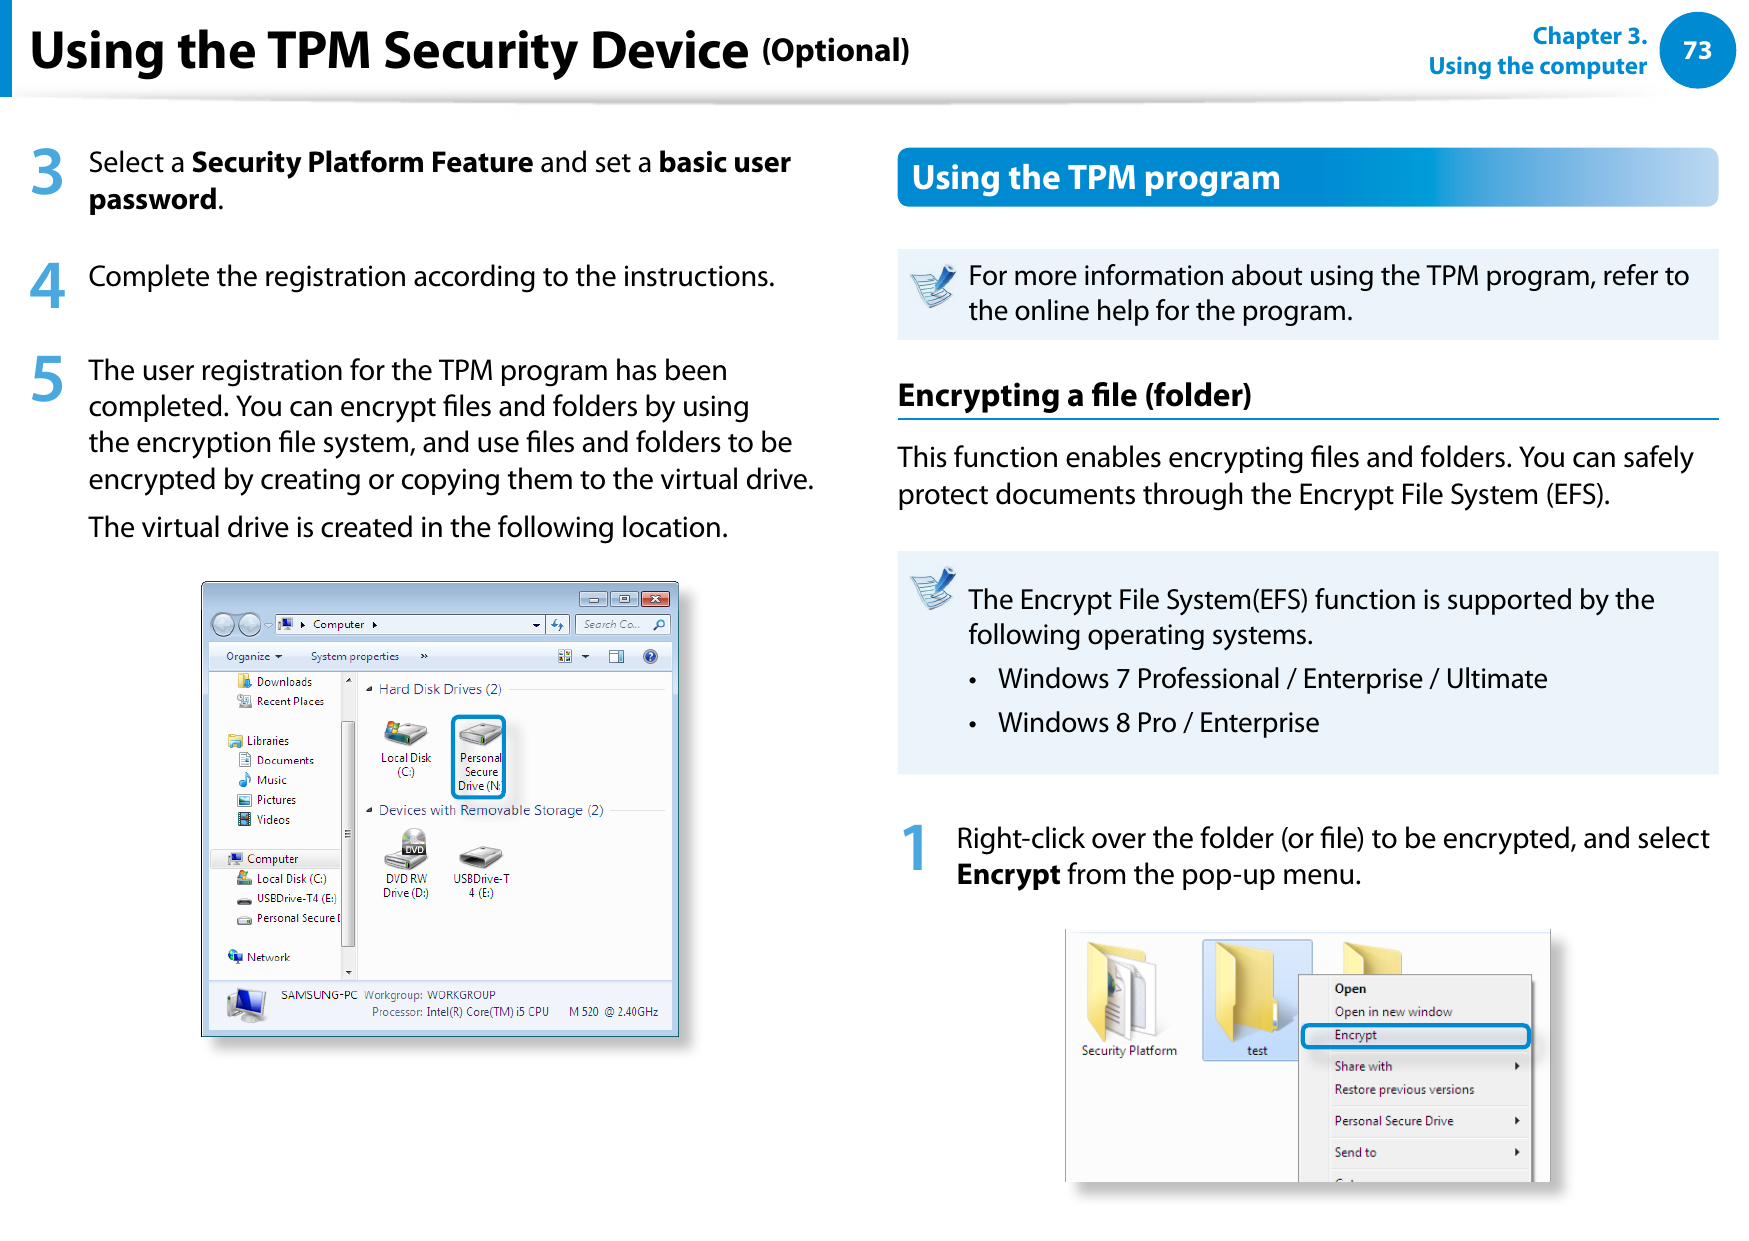 7273Chapter 3.  Using the computerUsing the TPM Security Device (Optional)3  Select a Security Platform Feature and set a basic user password.4  Complete the registration according to the instructions.5  The user registration for the TPM program has been completed. You can encrypt les and folders by using the encryption le system, and use les and folders to be encrypted by creating or copying them to the virtual drive. The virtual drive is created in the following location. Using the TPM programFor more information about using the TPM program, refer to the online help for the program.Encrypting a le (folder) This function enables encrypting les and folders. You can safely protect documents through the Encrypt File System (EFS).The Encrypt File System(EFS) function is supported by the following operating systems.Windows 7 Professional / Enterprise / Ultimate • Windows 8 Pro / Enterprise• 1  Right-click over the folder (or le) to be encrypted, and select Encrypt from the pop-up menu. 